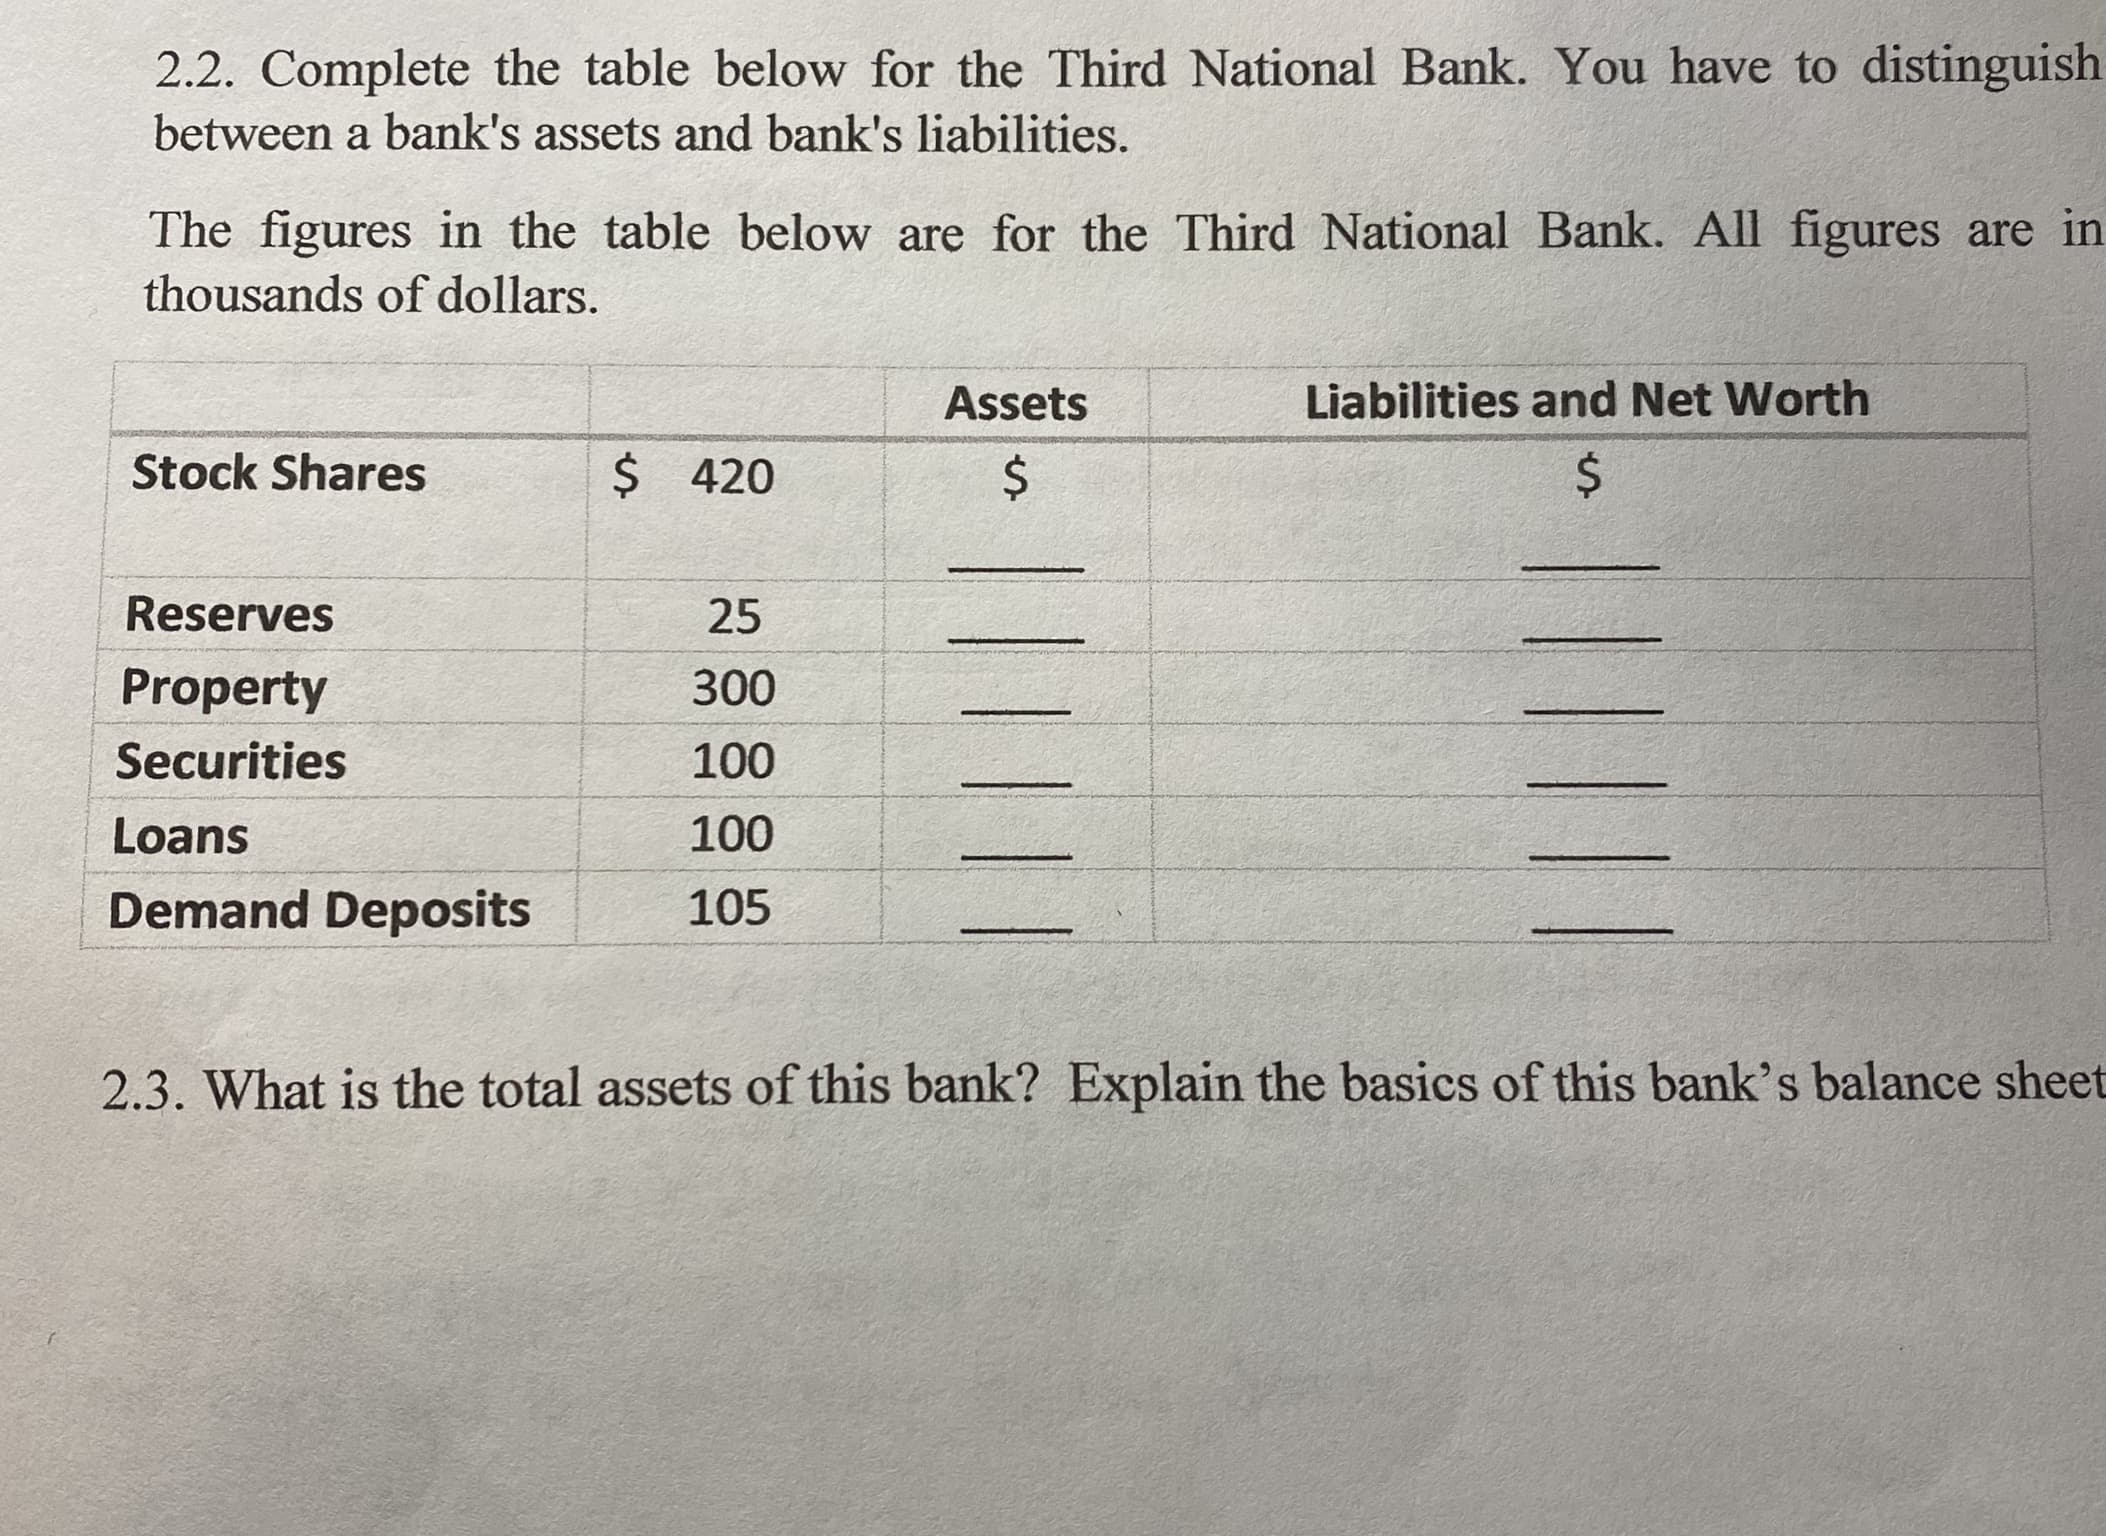 2.2. Complete the table below for the Third National Bank. You have to distinguish
between a bank's assets and bank's liabilities.
The figures in the table below are for the Third National Bank. All figures are in
thousands of dollars.
Assets
Liabilities and Net Worth
Stock Shares
$ 420
$4
Reserves
25
Property
300
Securities
100
Loans
100
Demand Deposits
105
2.3. What is the total assets of this bank? Explain the basics of this bank's balance sheet
%24
